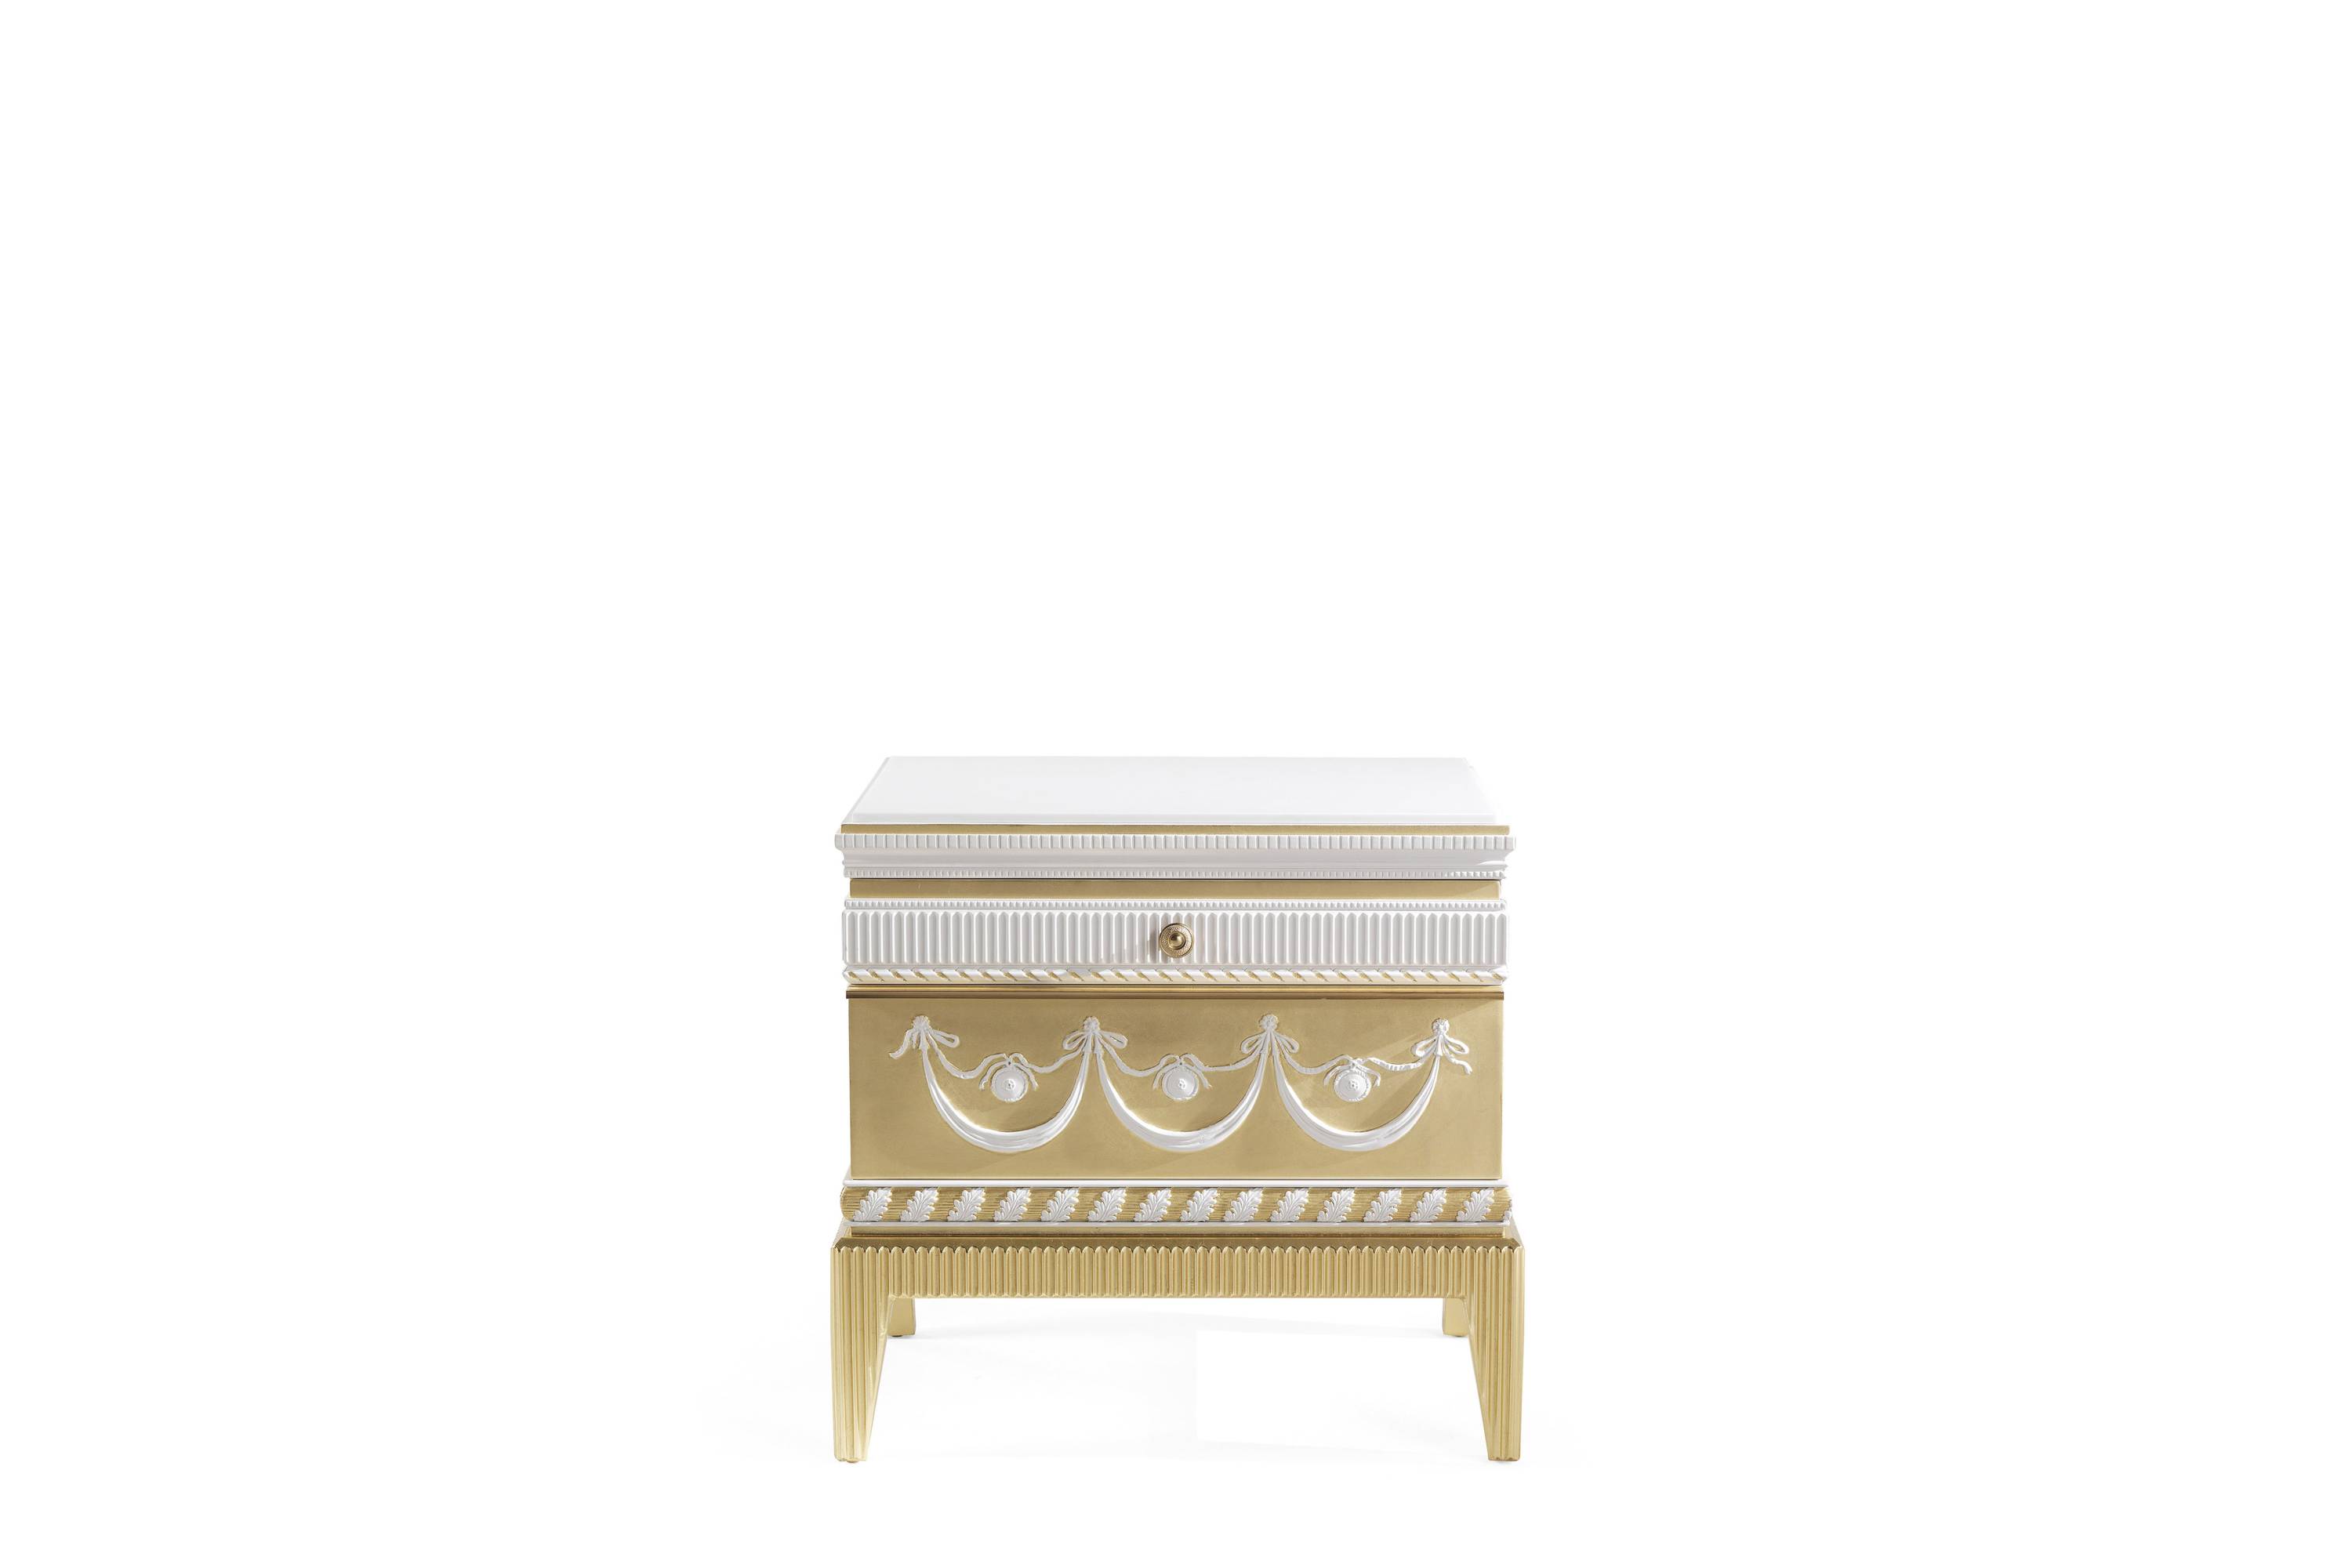 PORTLAND night table – Jumbo Collection Italian luxury classic night storage units. tailor-made interior design projects to meet all your furnishing needs